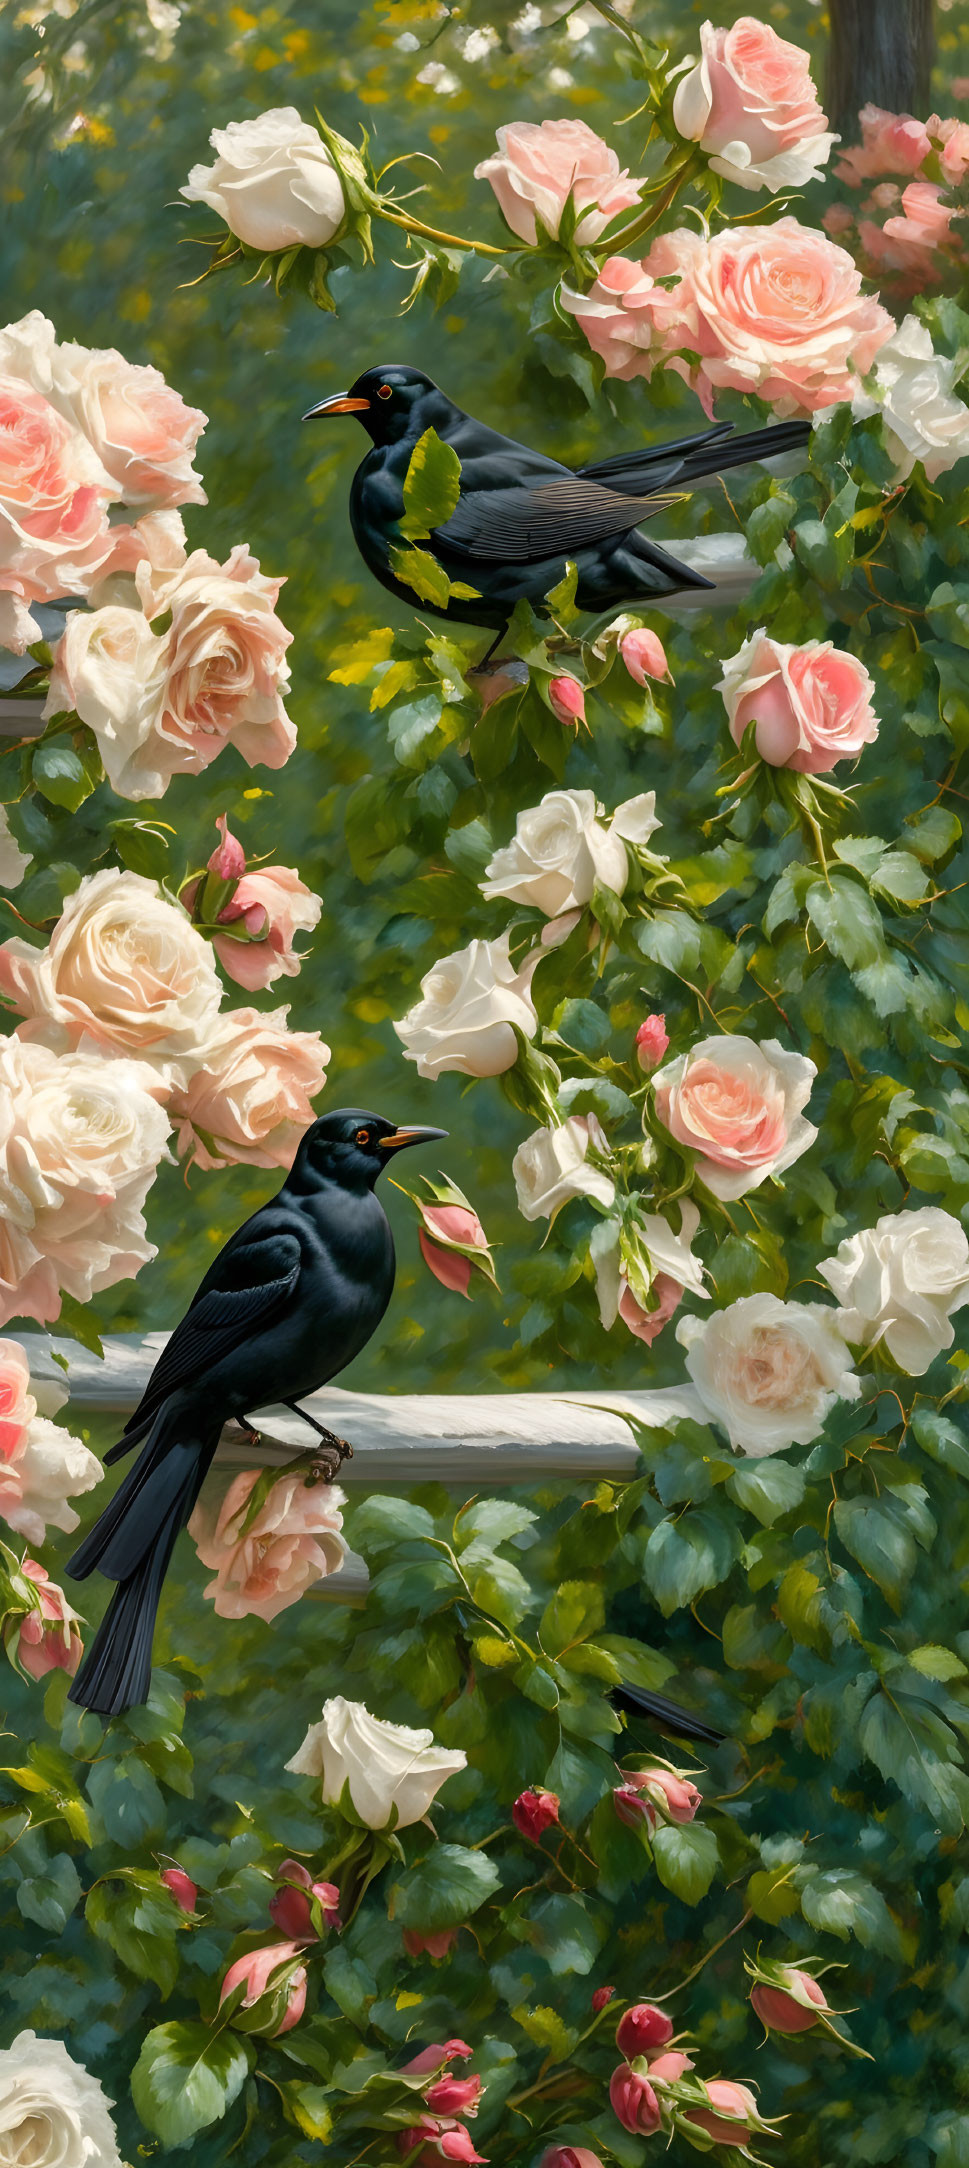 Blackbirds perched on blooming pink and white roses in lush setting